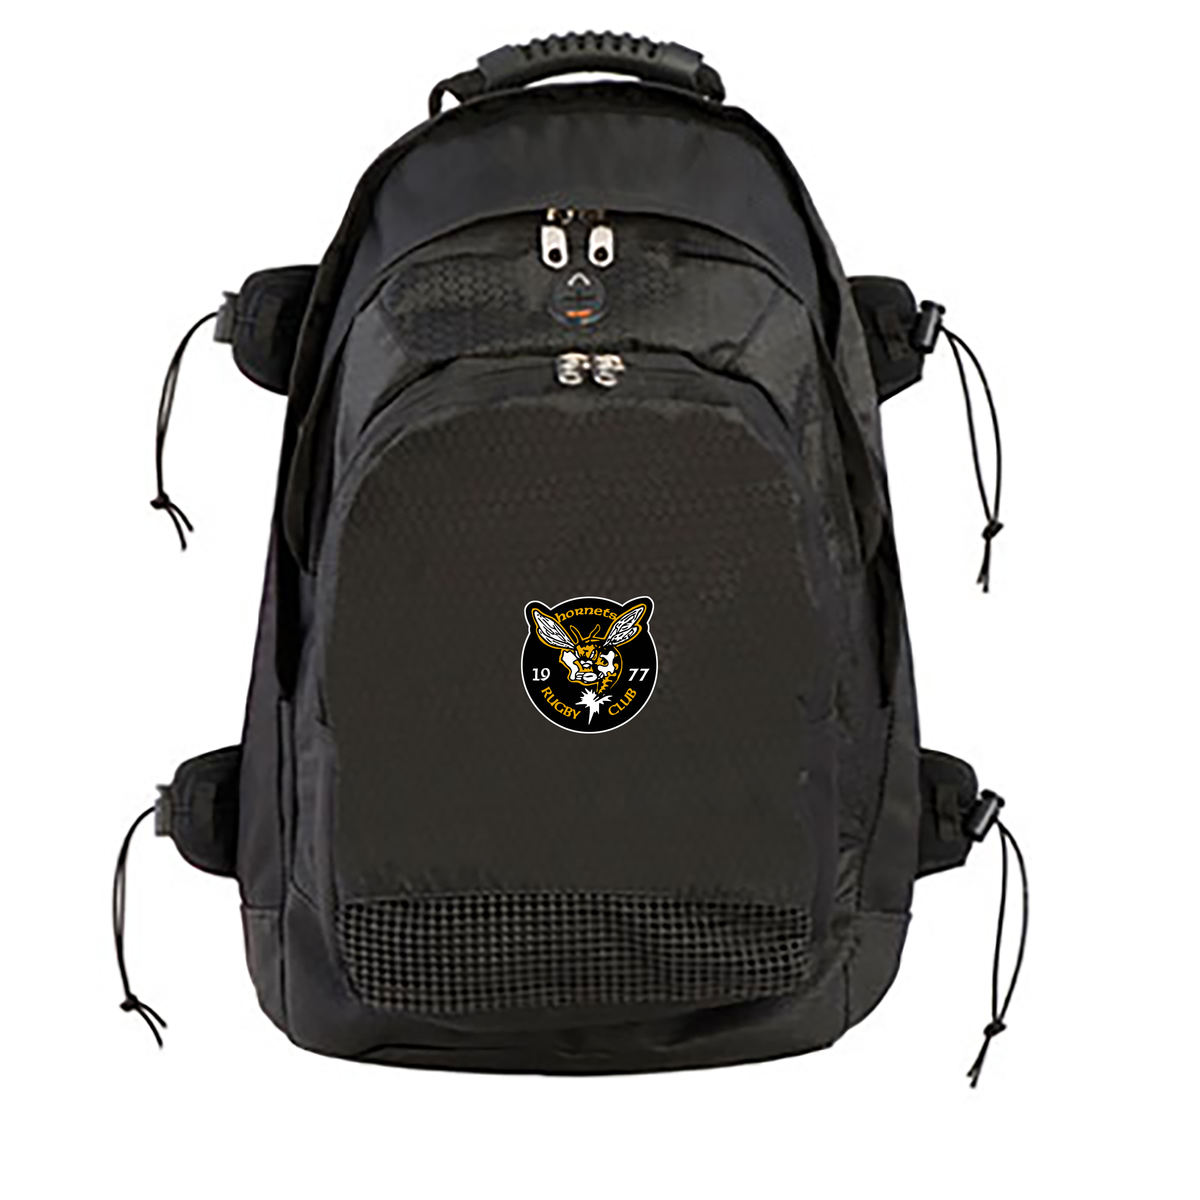 St. Louis Hornets Rugby Club Deluxe Sports Backpack